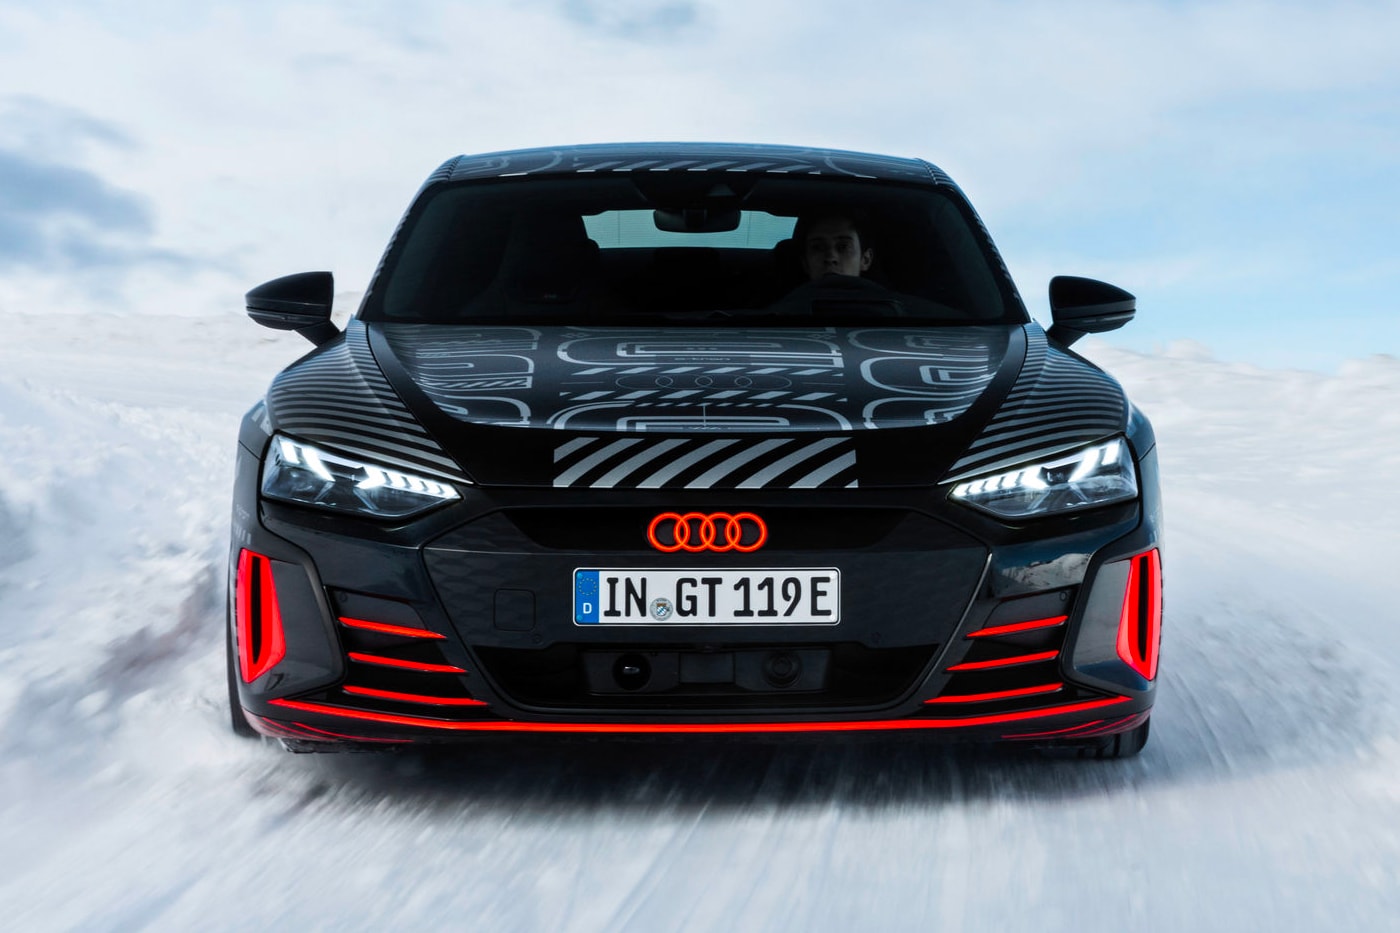 Audi's Electric e-tron GT Sports Car Is Set for a World Premiere on February 9 Marc Lichte r8 sports cars supercars taycan porsche tesla 